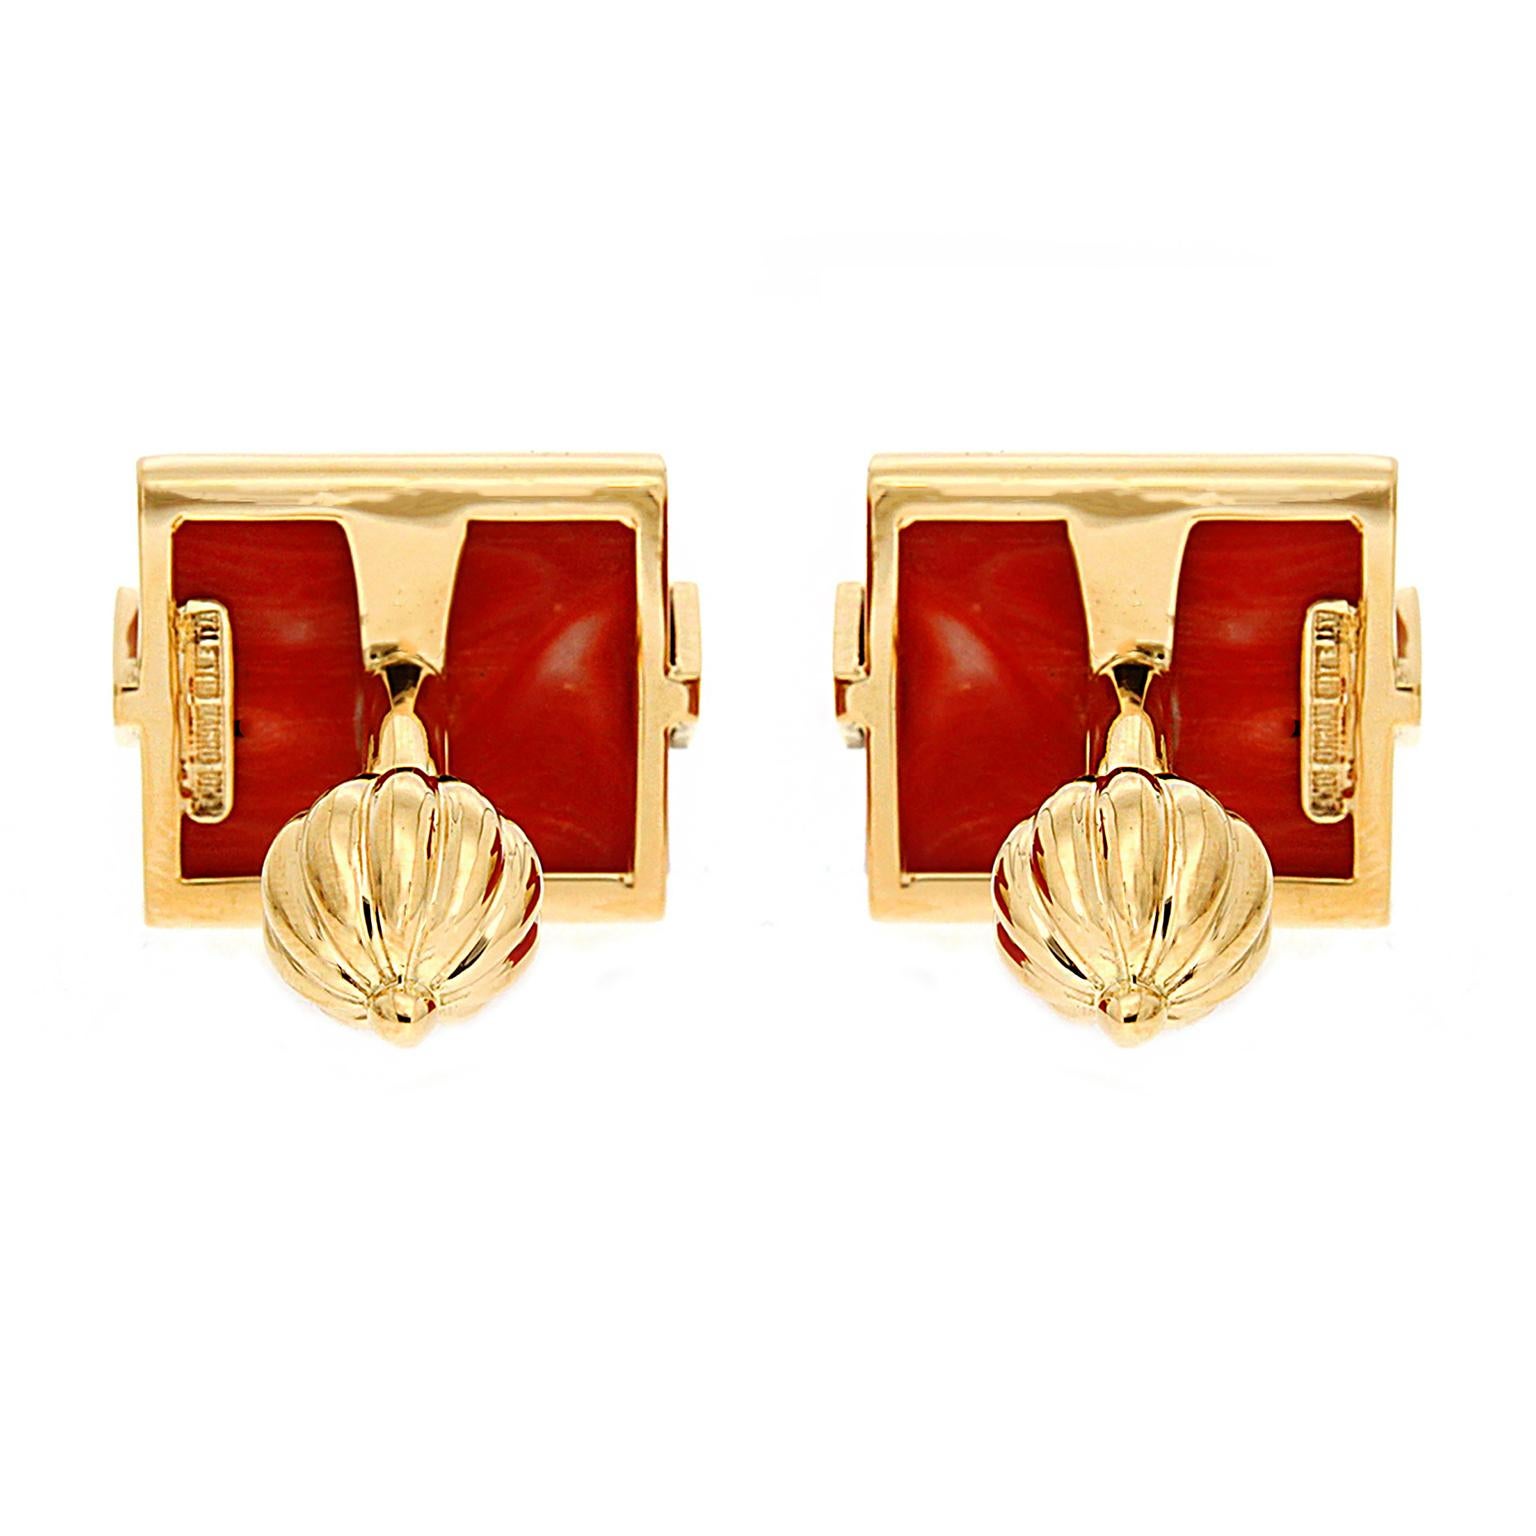 Geometric silhouettes create a prominent design. Red coral in a rectangle shape is the gem of choice, while 18k yellow gold triangles on the sides underline the vivid color of the coral. The total weight of the gem is 33.38 carats. A bar and ribbed